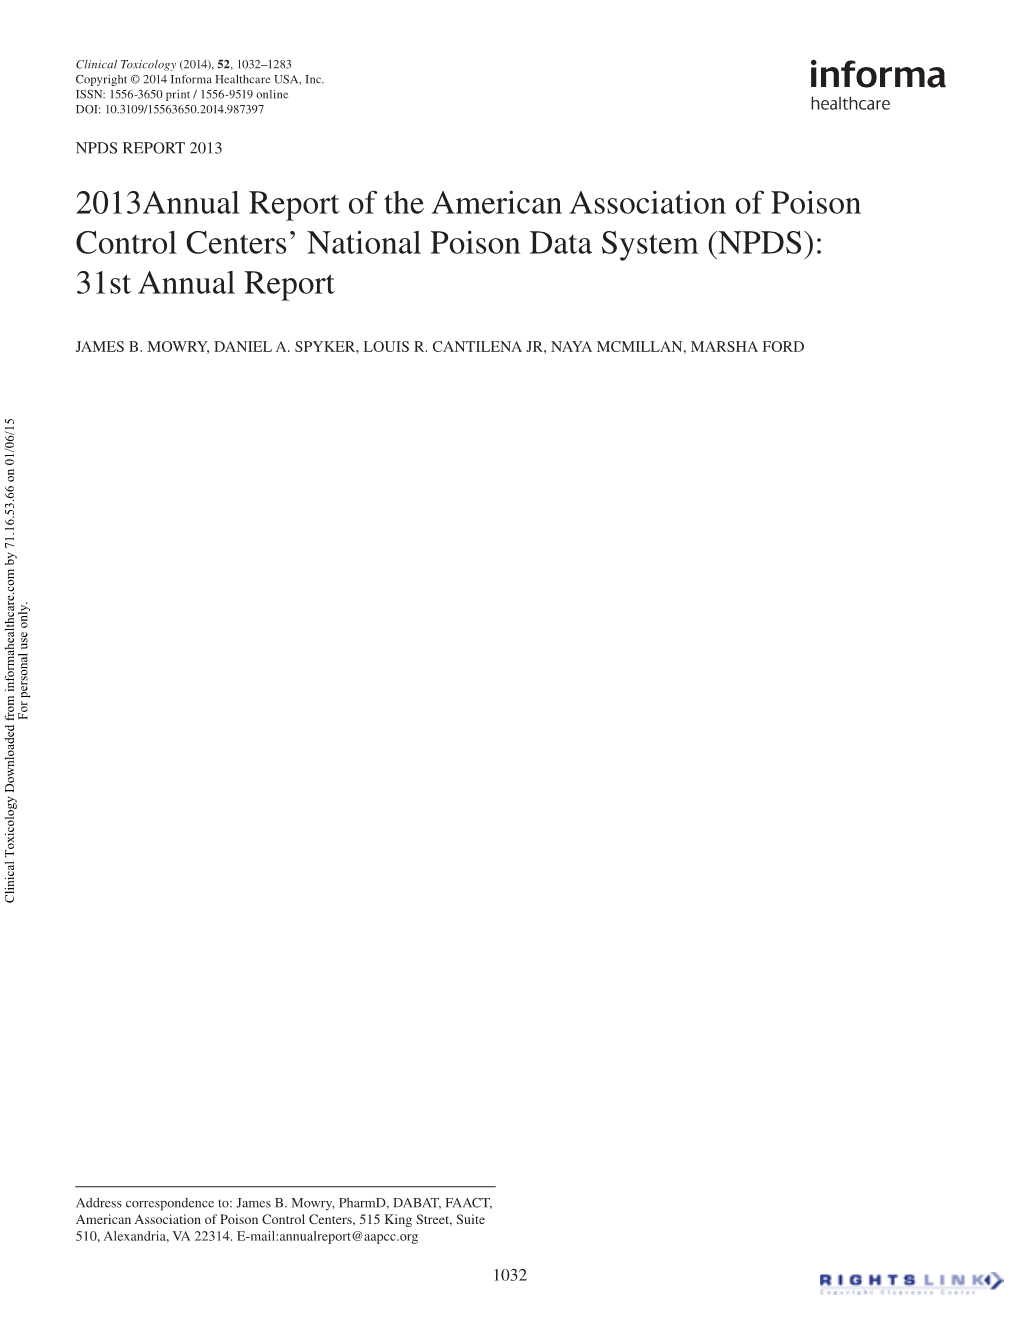 National Poison Data System (NPDS): 31St Annual Report